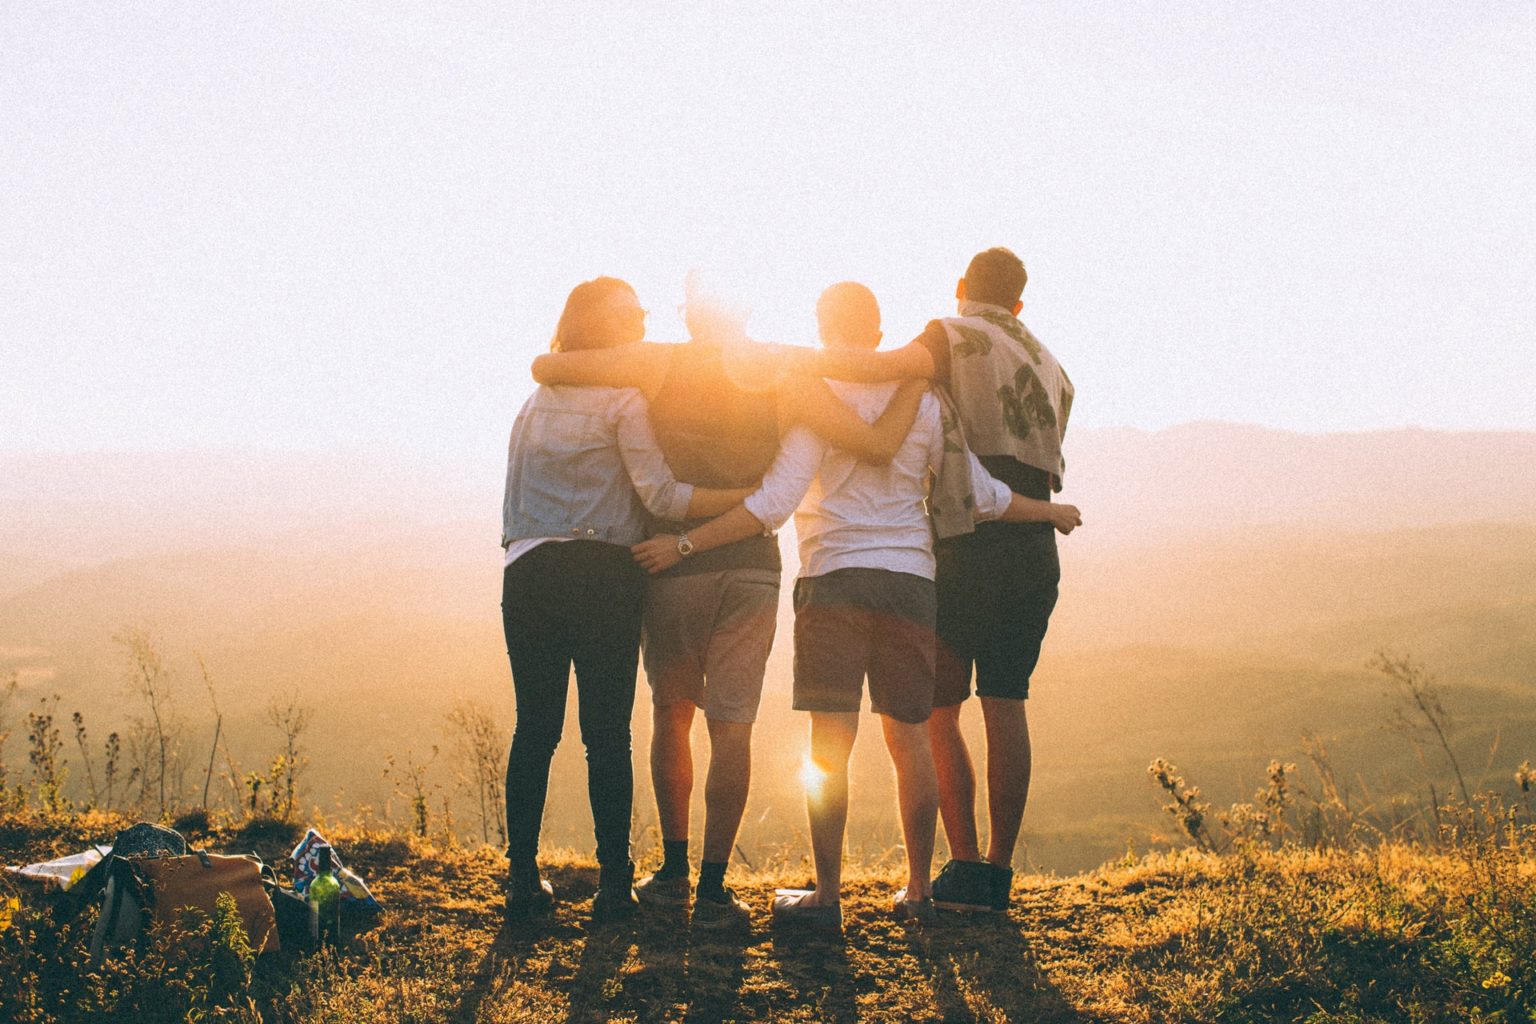 a group of people standing on a hill with the sun setting